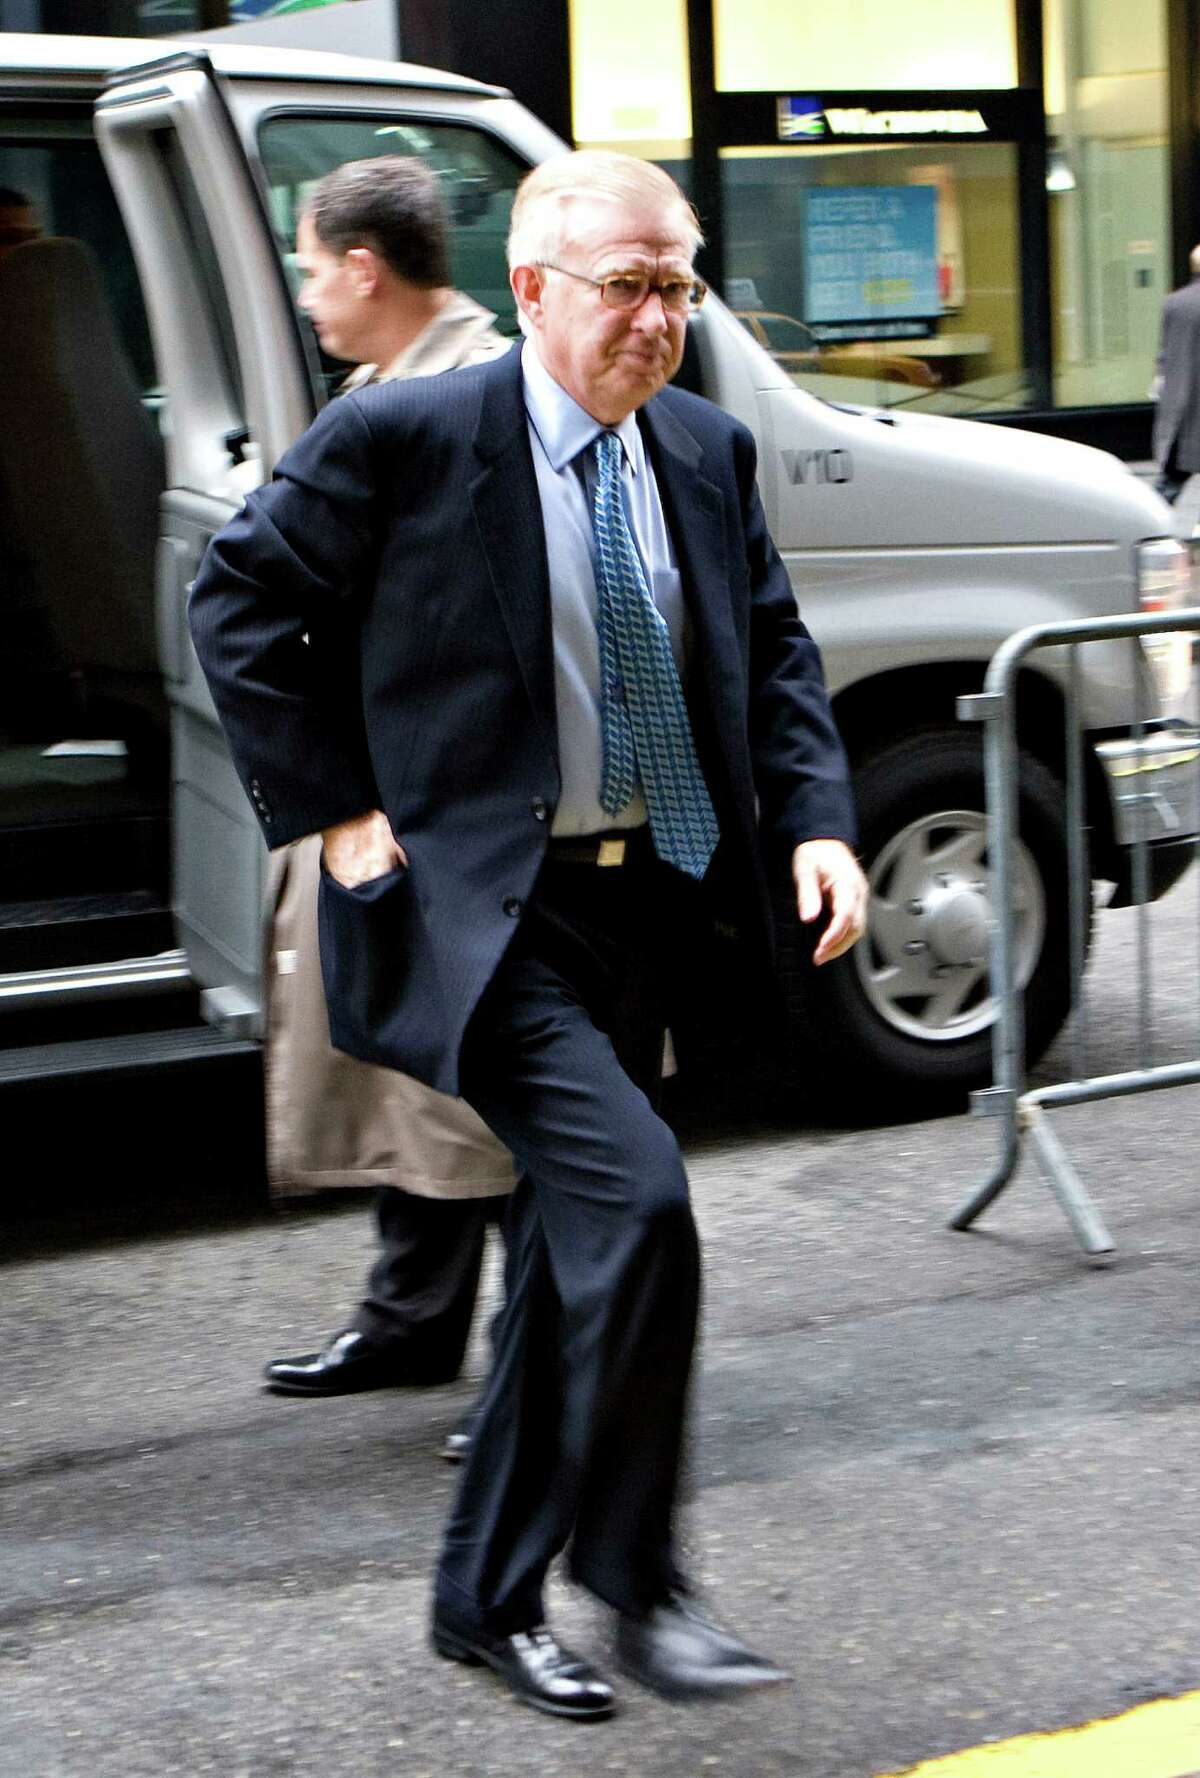 Michael O'Neill, former chief executive officer of the Bank of Hawaii, arrives for the shareholders meeting of Citigroup Inc., at the Hilton Hotel in New York, U.S., on Tuesday, April 21, 2009. O'Neill was elected to the Citigroup board during the meeting. Photographer: Daniel Acker/Bloomberg News